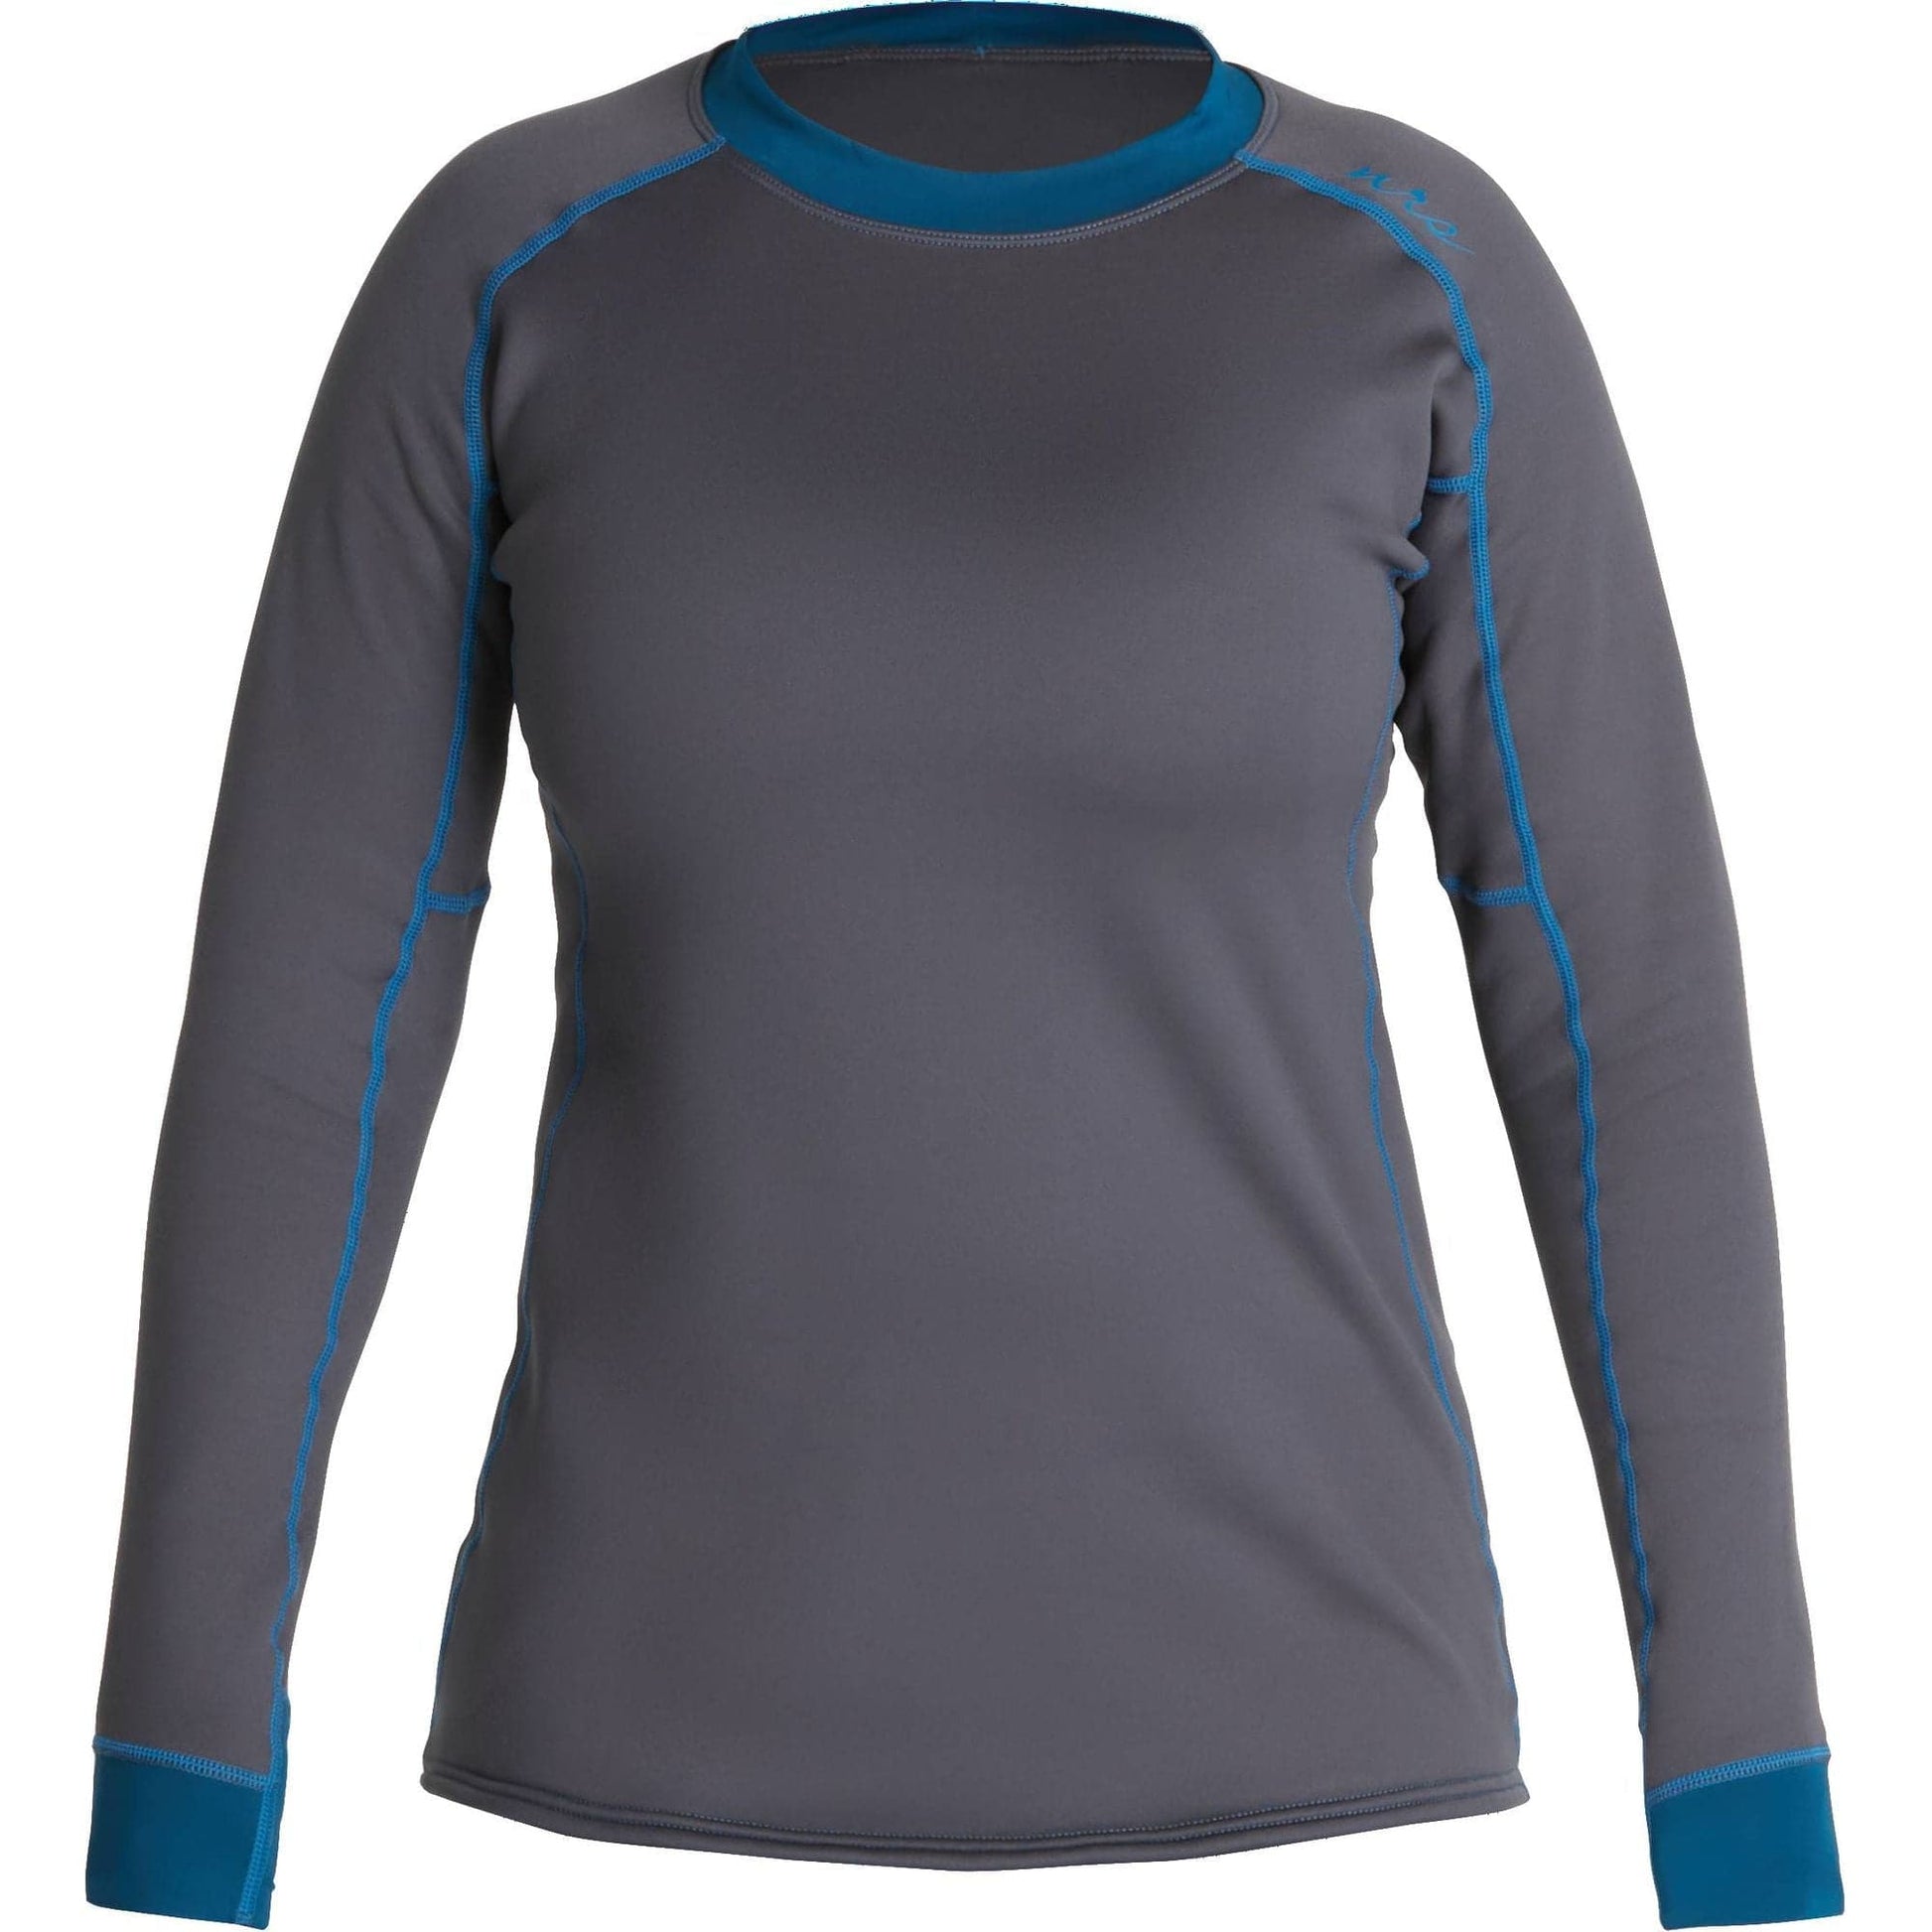 Featuring the Expedition Fleece W's shirt, women's thermal layering manufactured by NRS shown here from one angle.